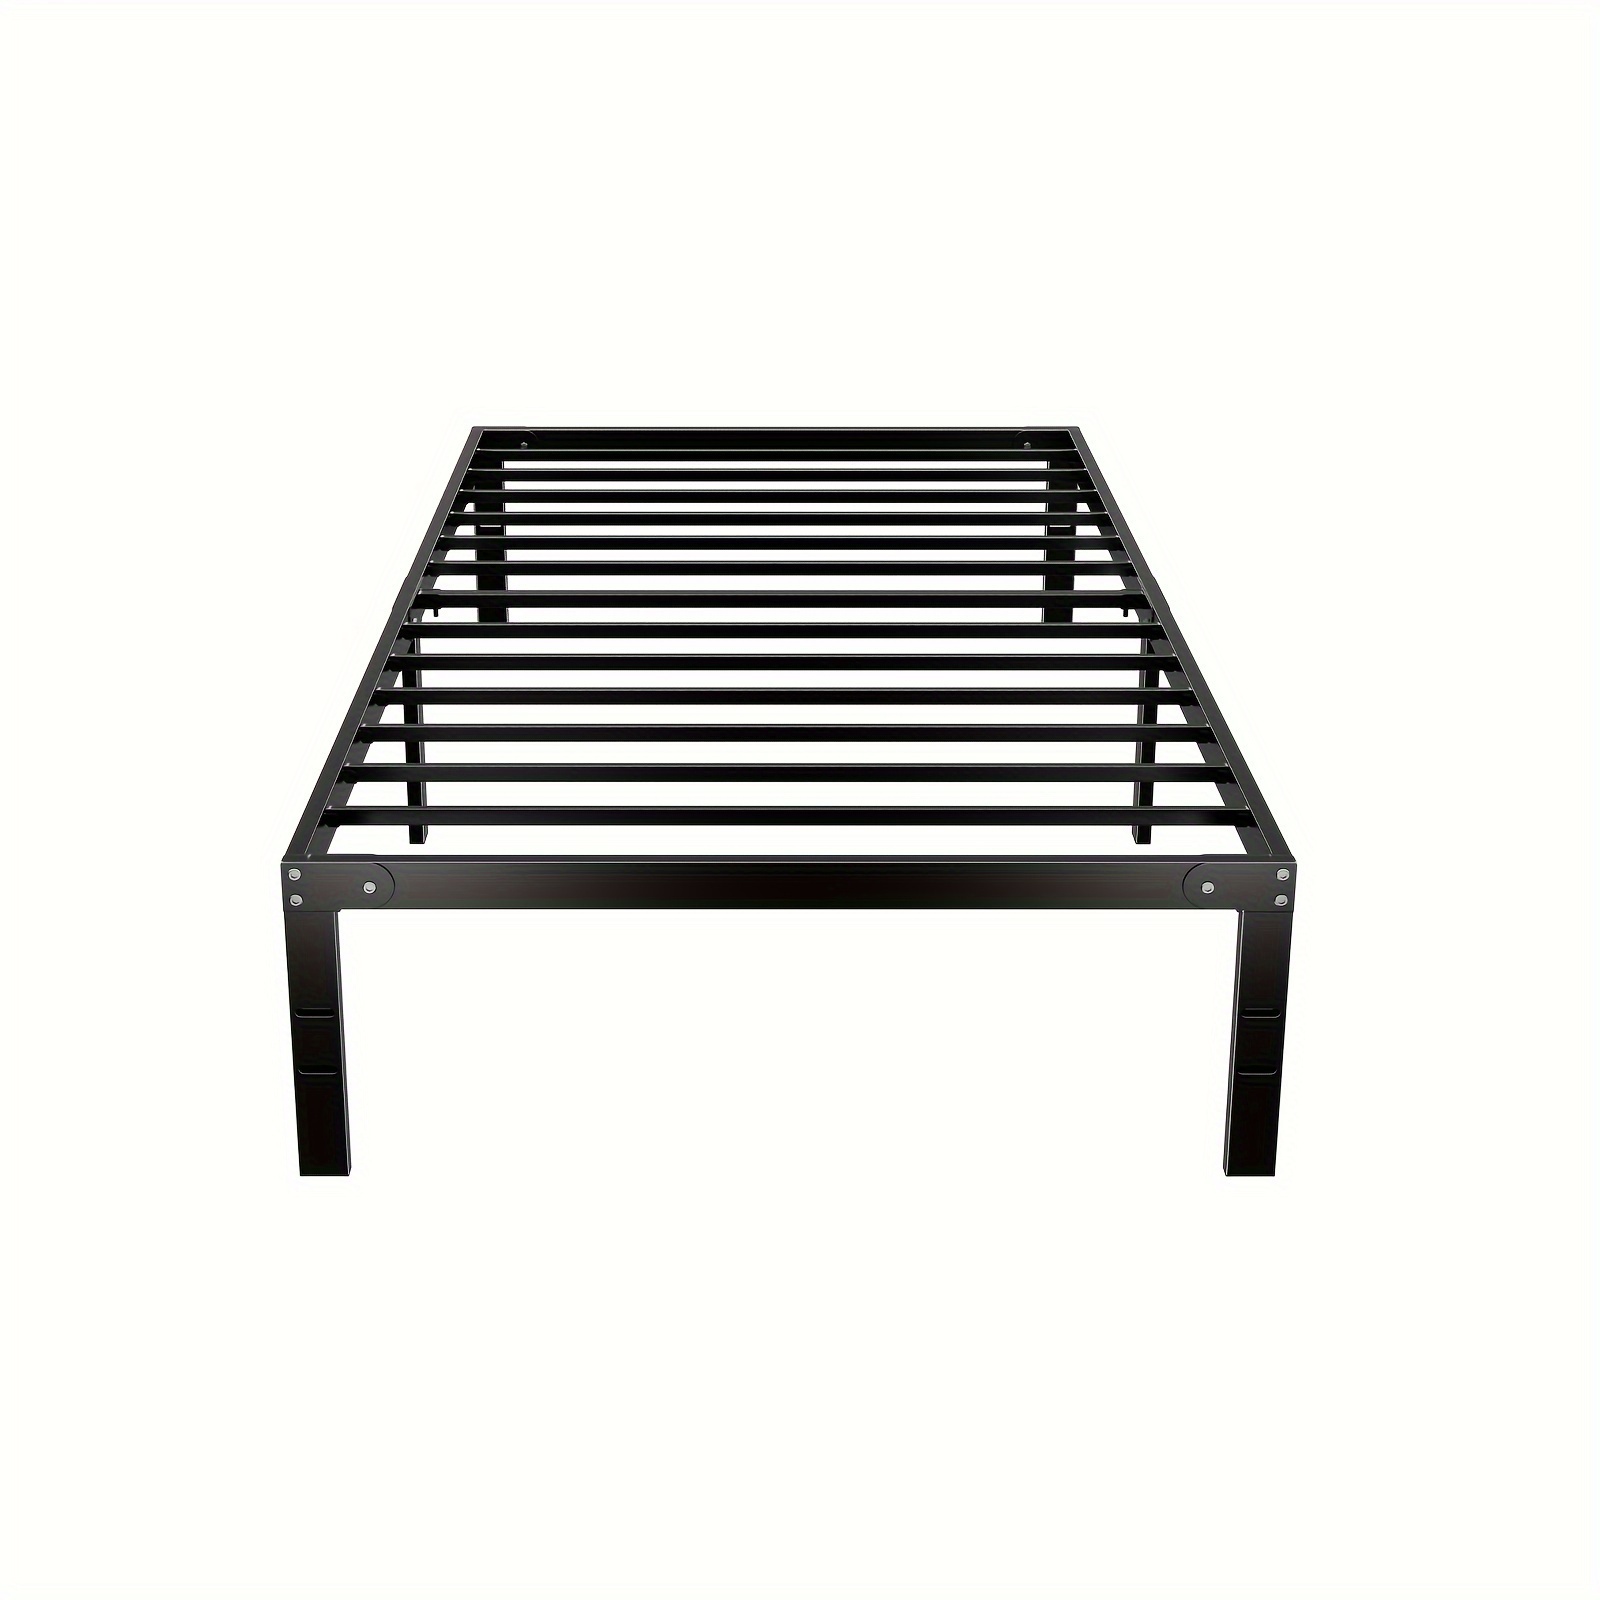 

Metal Bed Frame Support Sturdy Platform Mattress Foundation With Under Storage Space No Box Spring Needed Black Full Queen King Twin Size